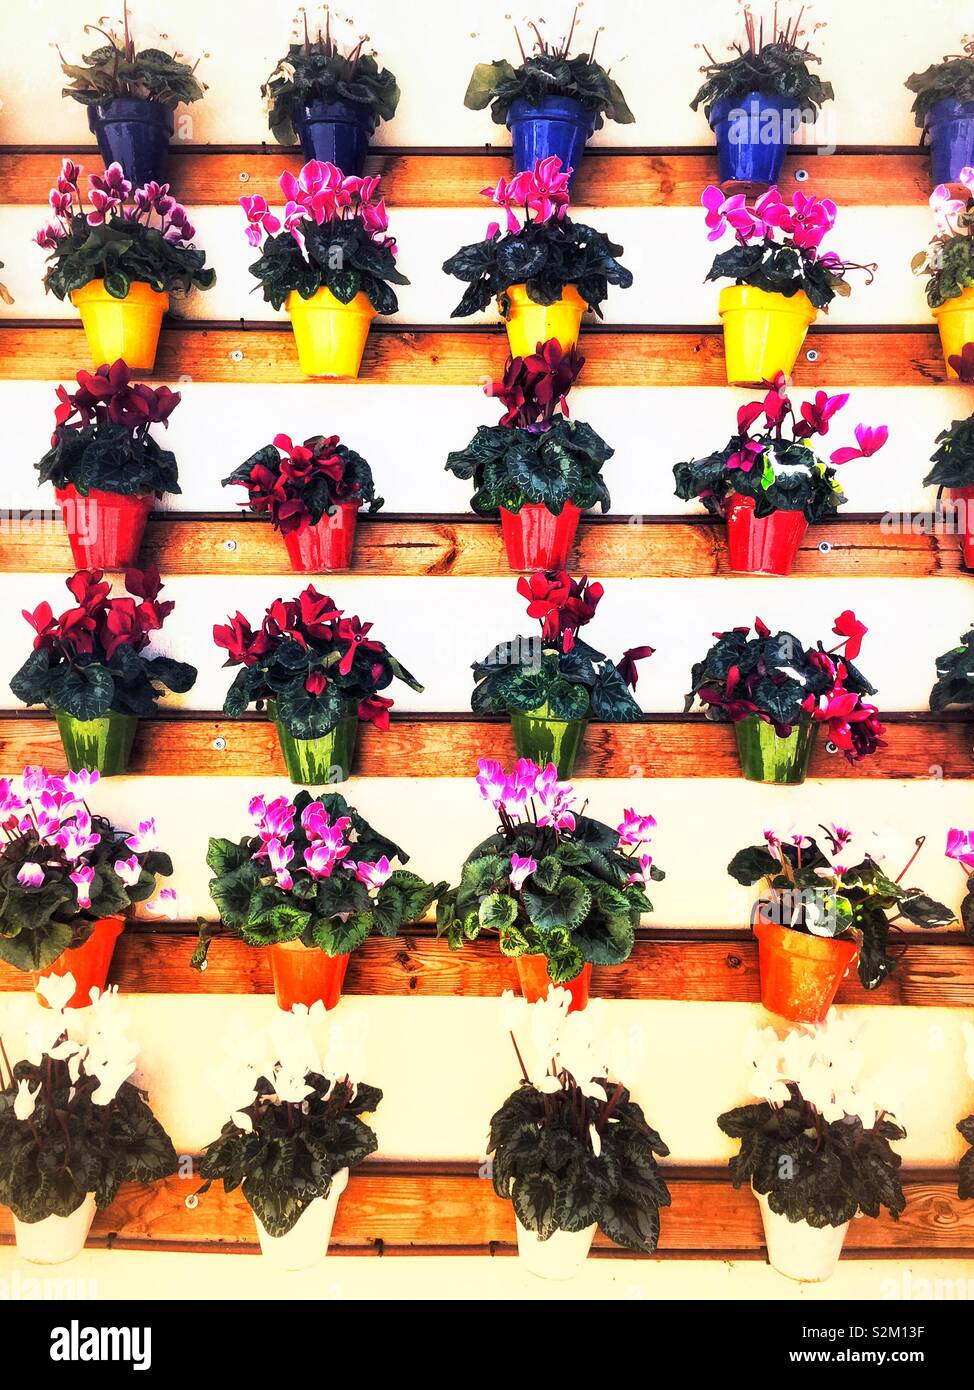 Display of colourful plant pots Stock Photo